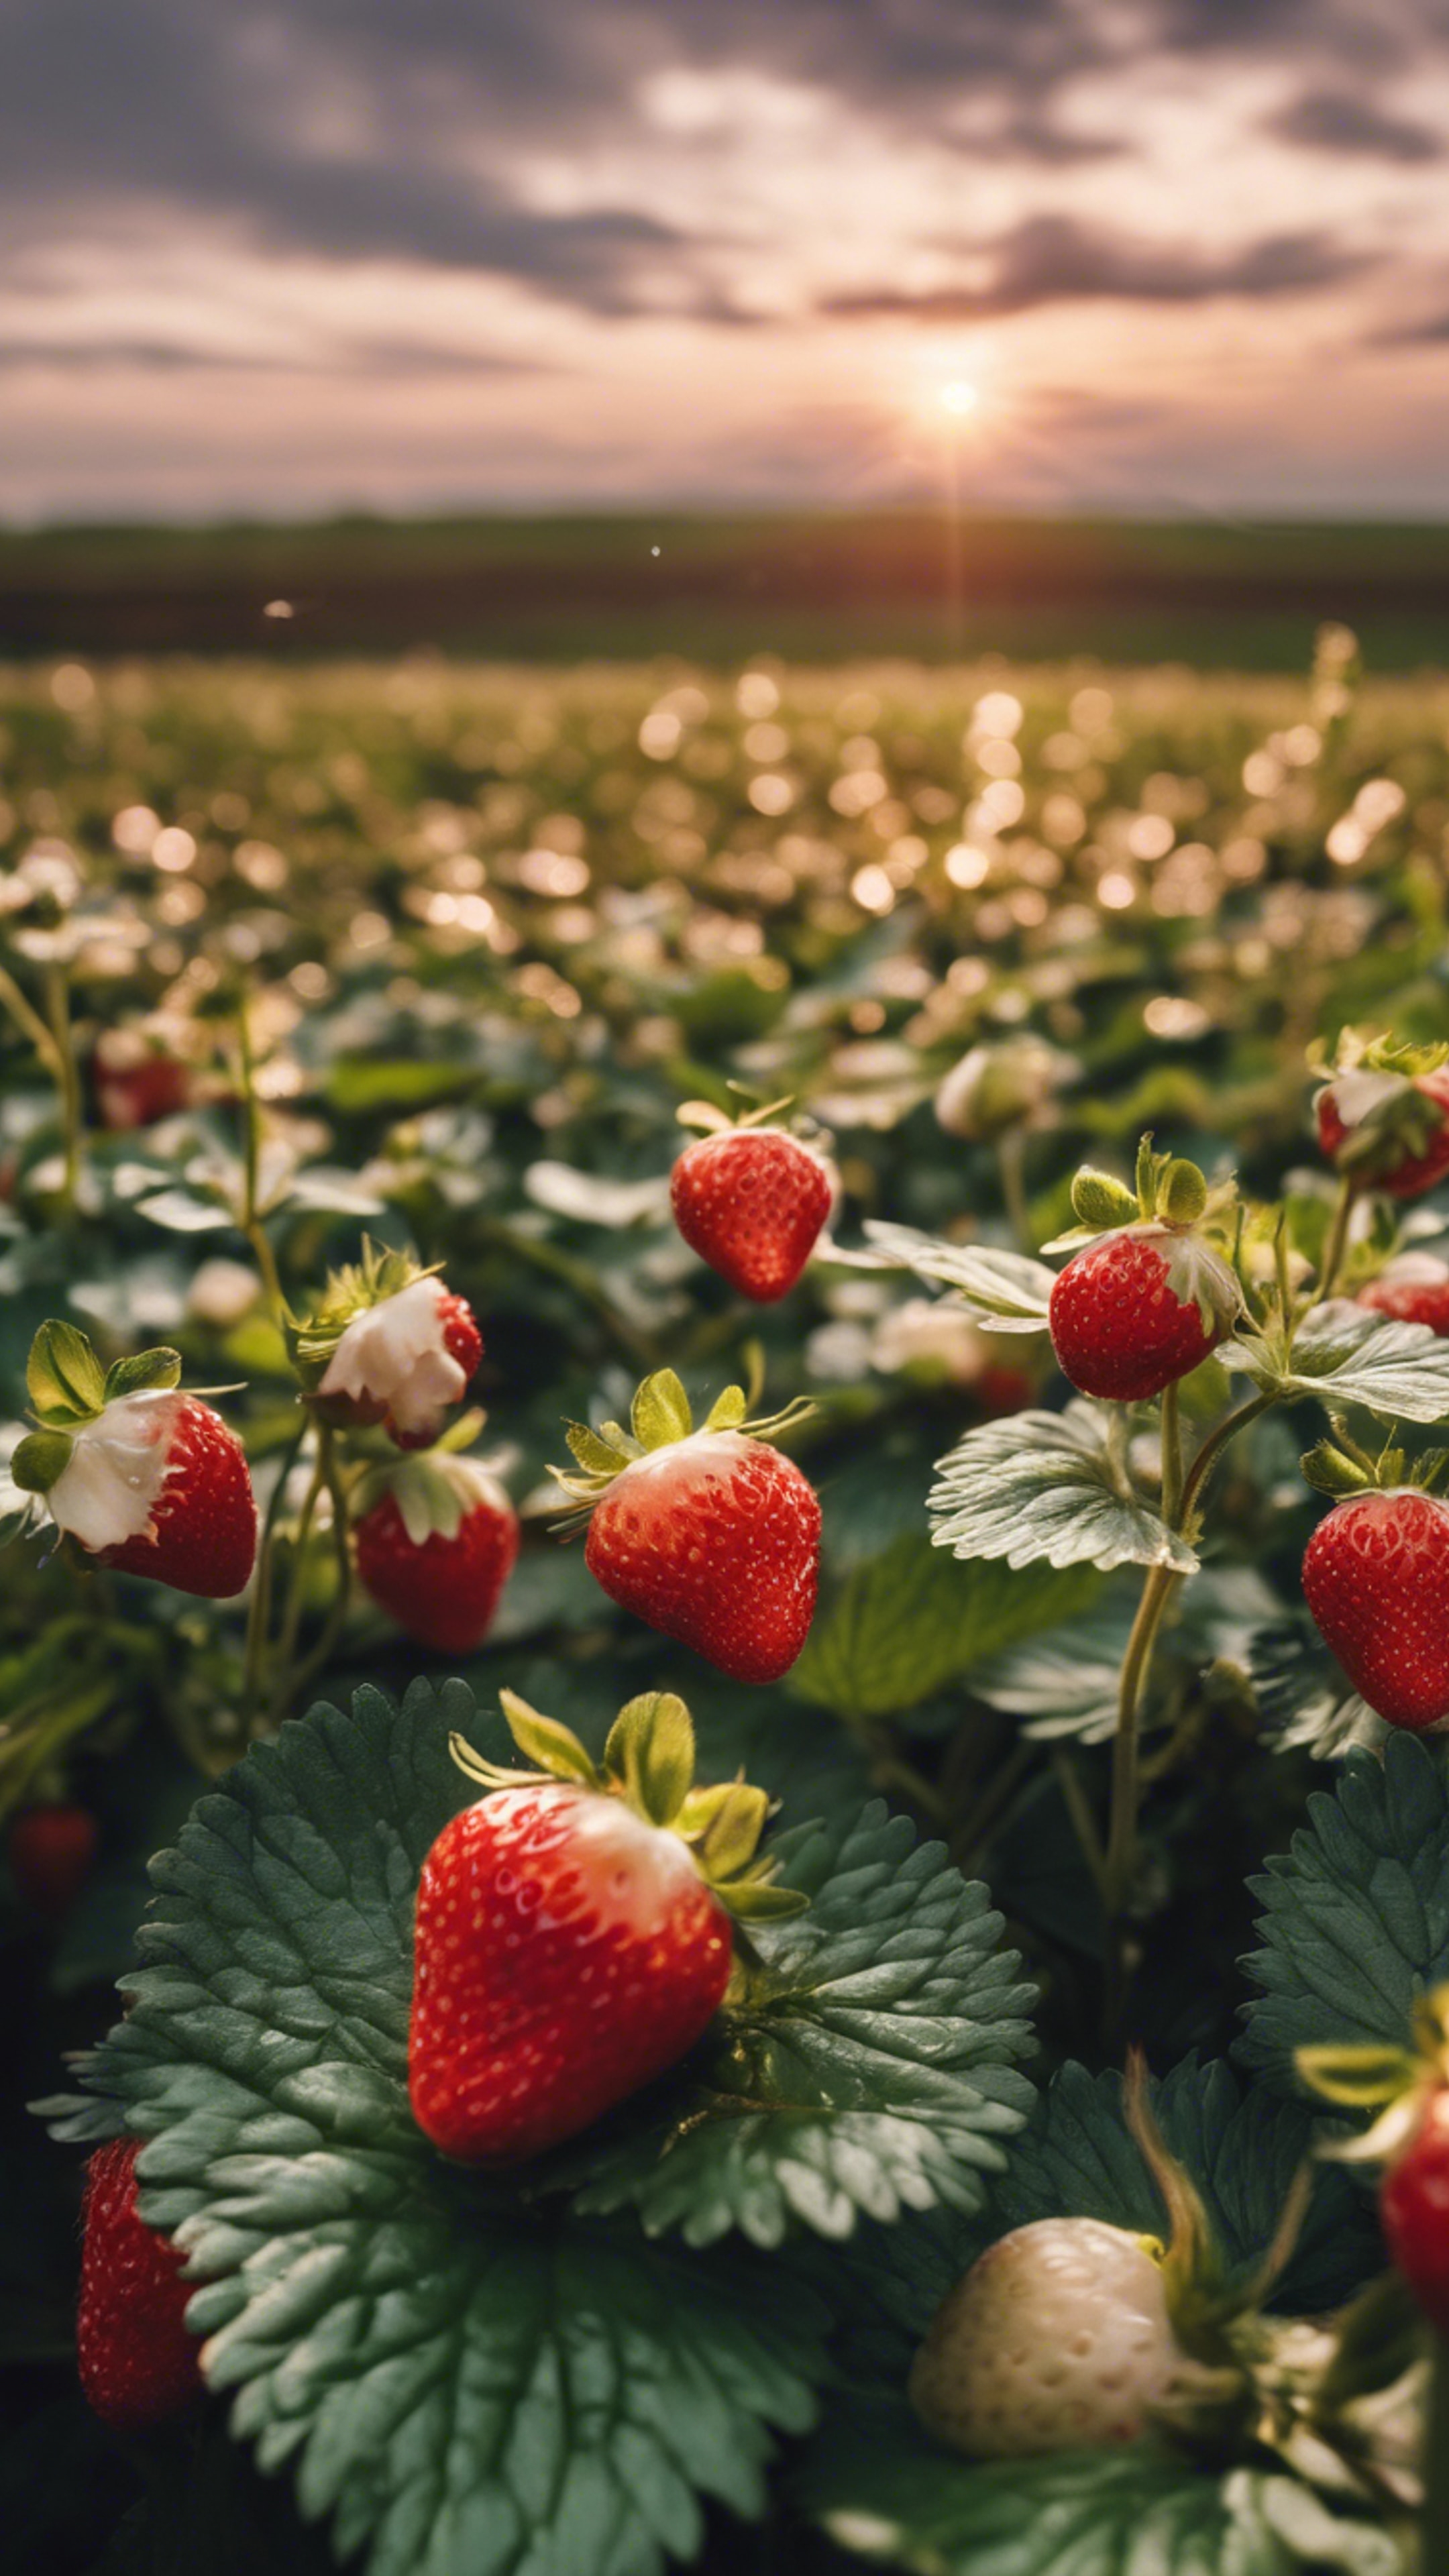 A romantic sunset view over a field of blooming strawberry plants. Papel de parede[3adde1a5bf4e4528ba85]